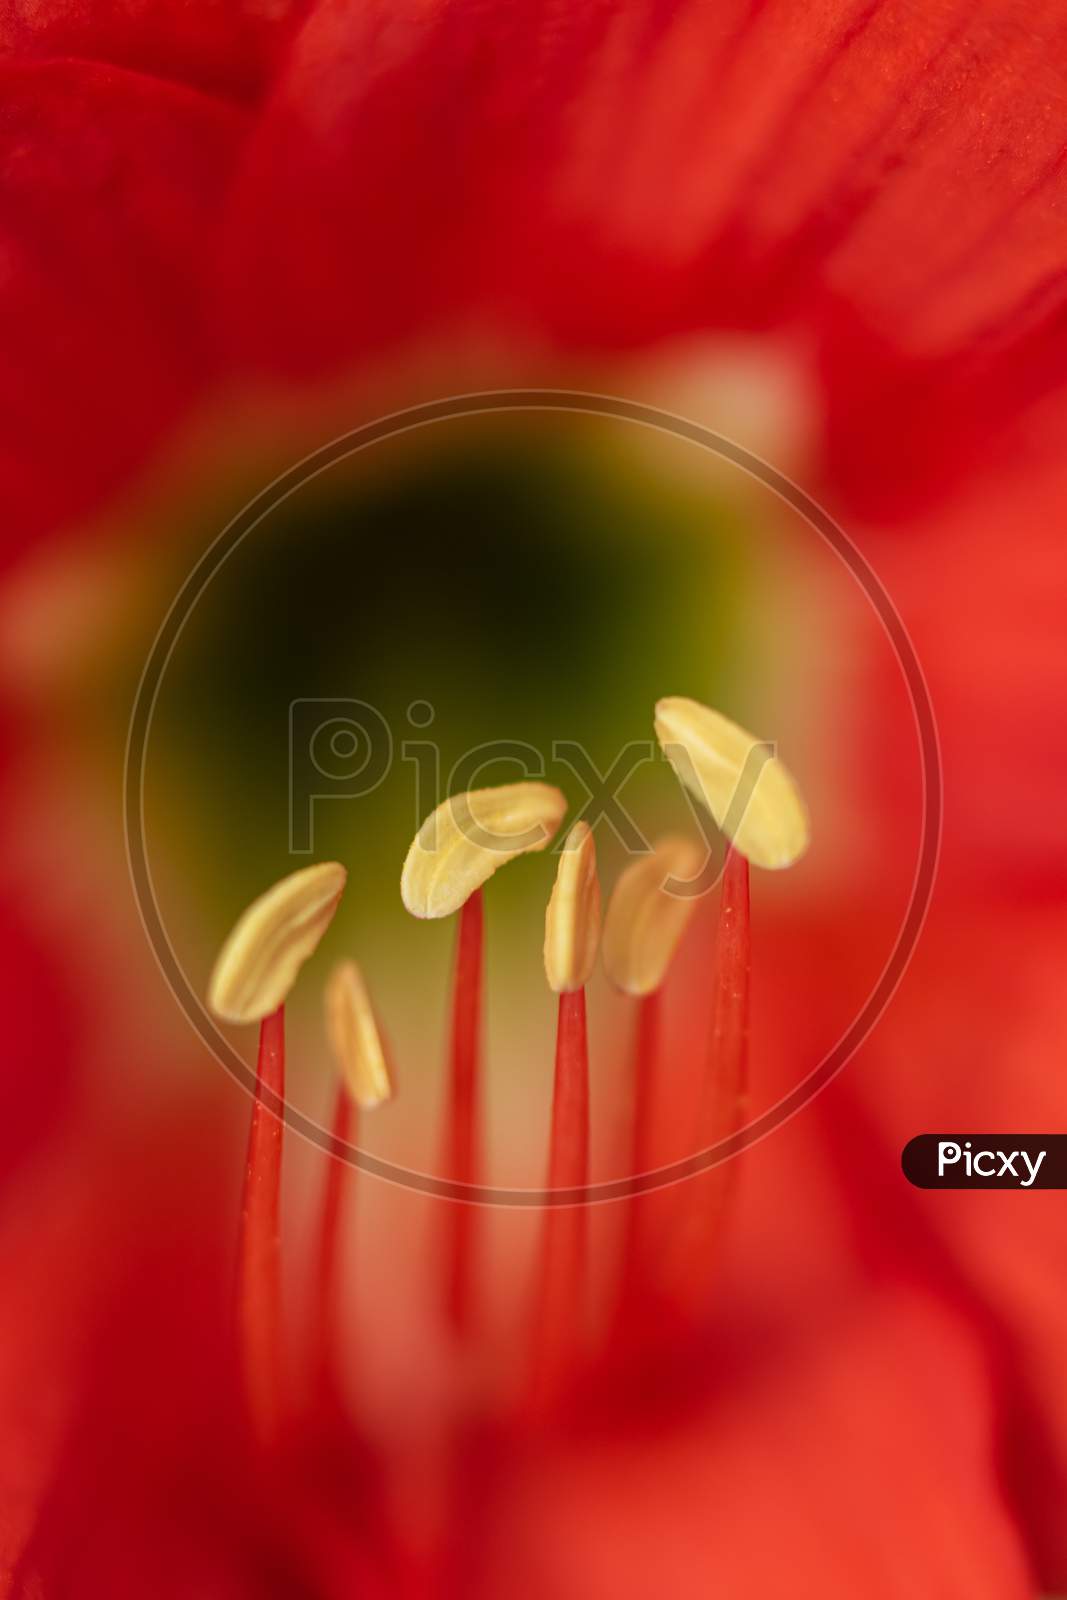 Selective focus Macro image of stamen of red Lily flower